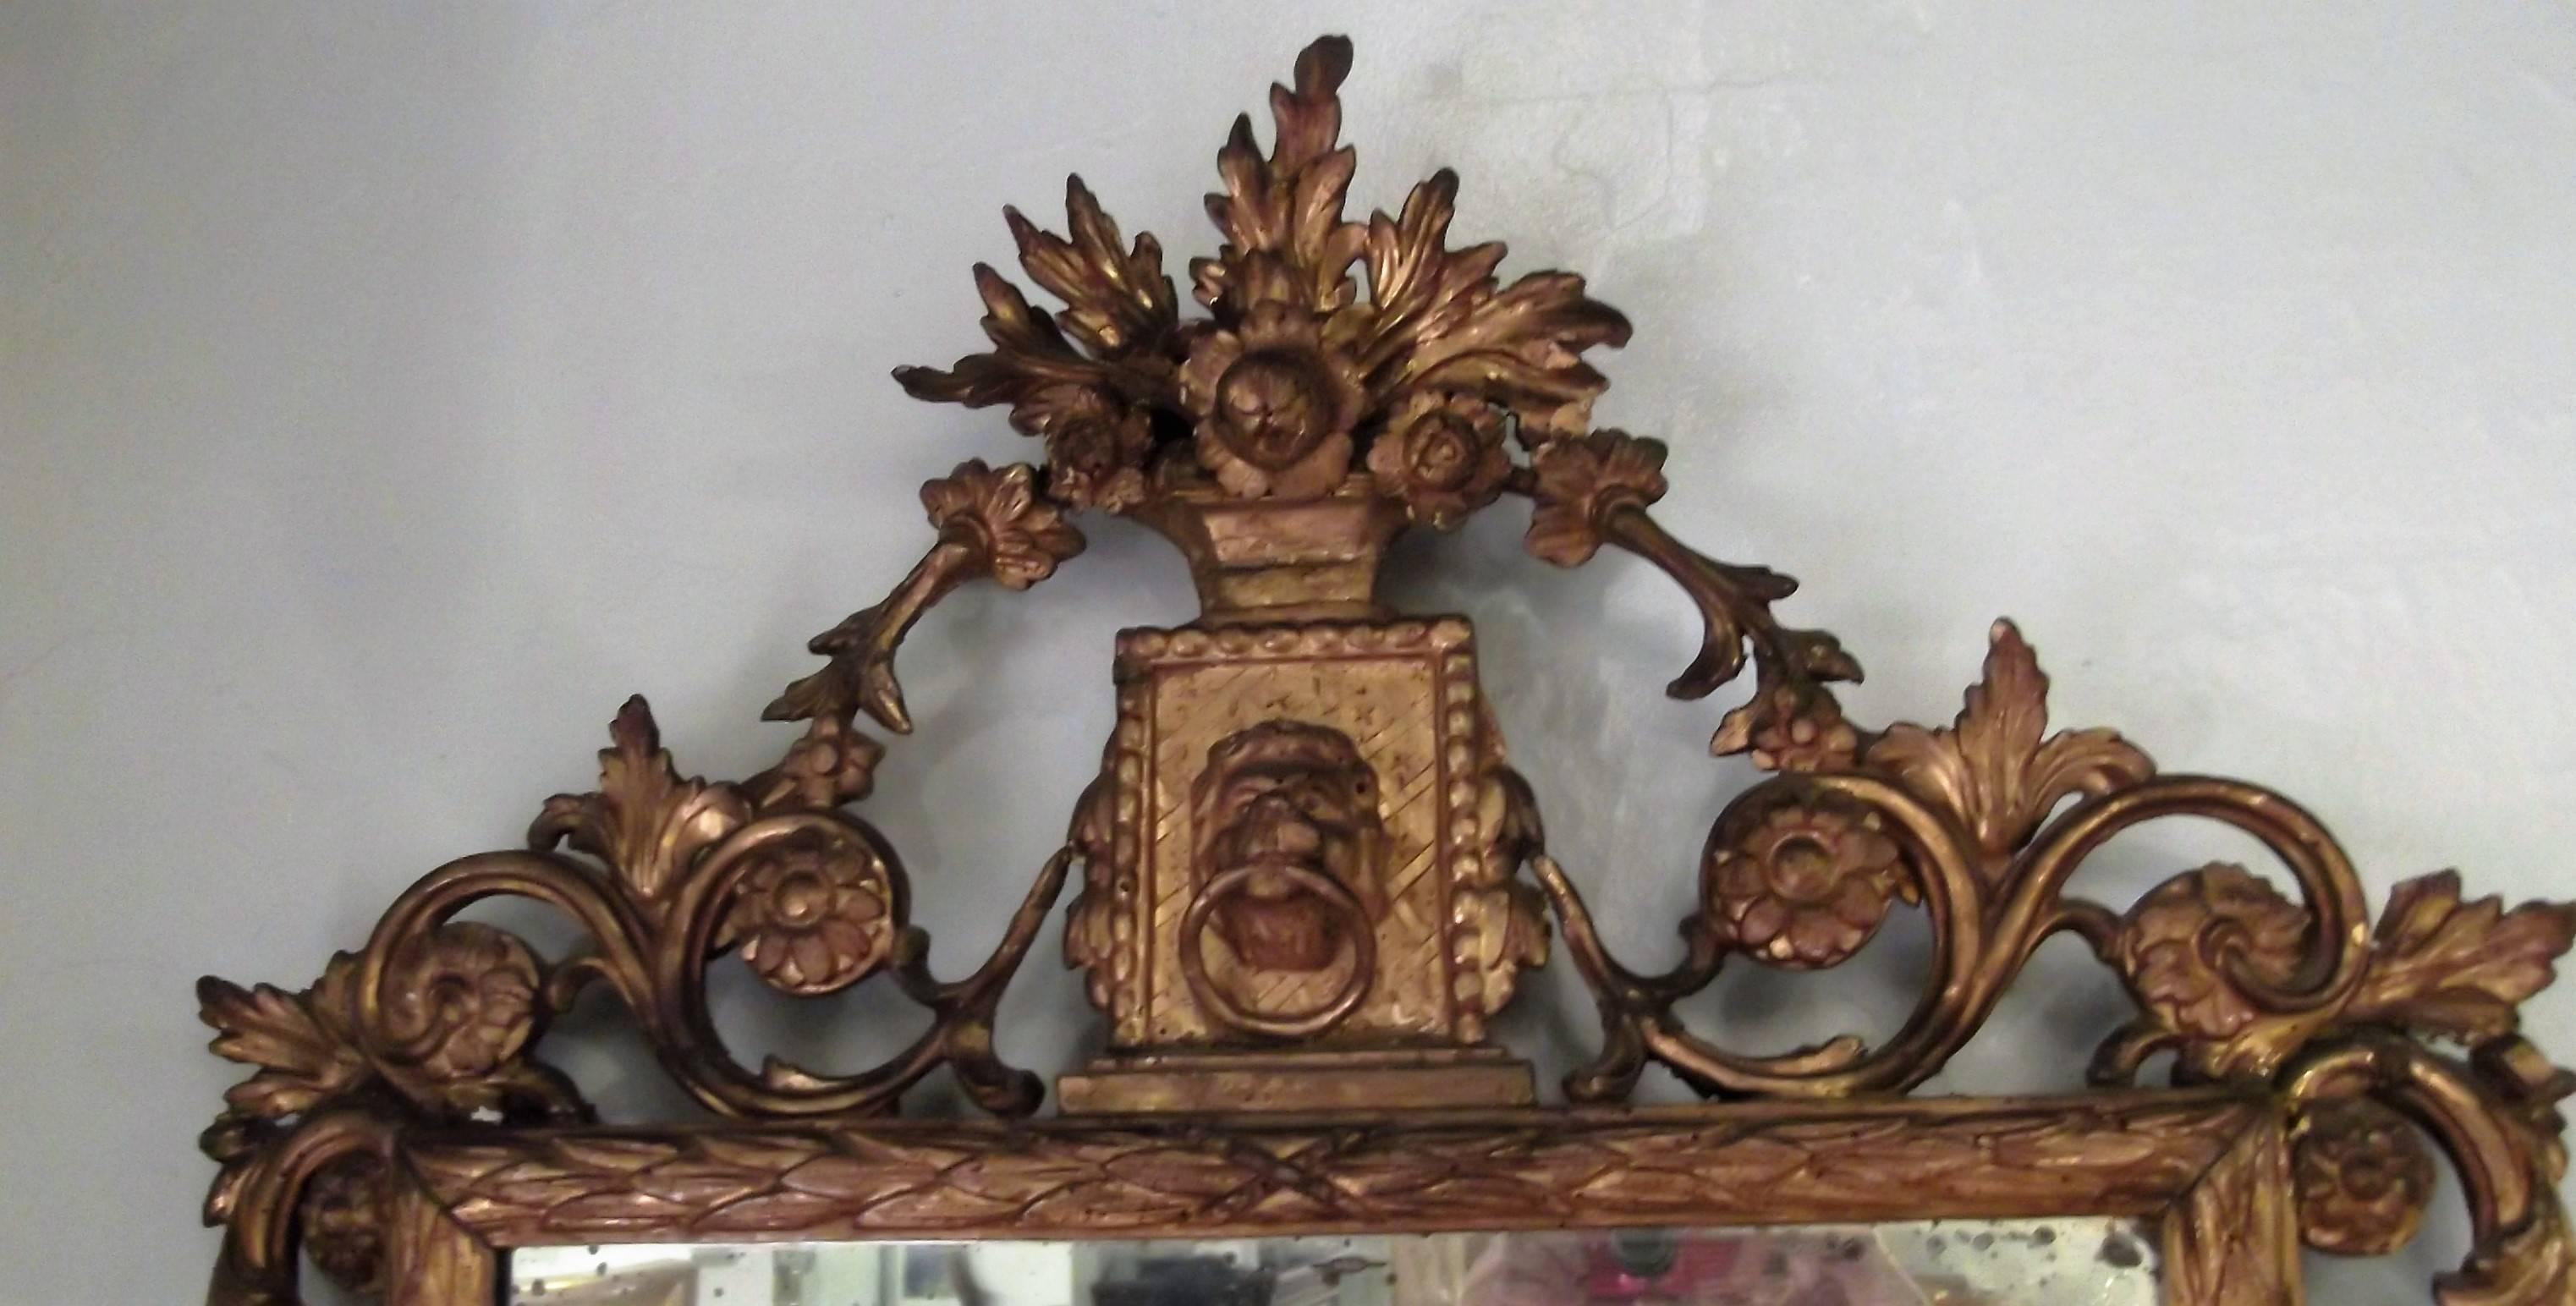 Authentic 18th century Italian mirror, the molded frame carved with laurel leaves. the tall crest with a lion mask surmounted by a basket of flowers and foliate scrolls with flower head paterae at the sides, the base with foliate scrolls and spurs.